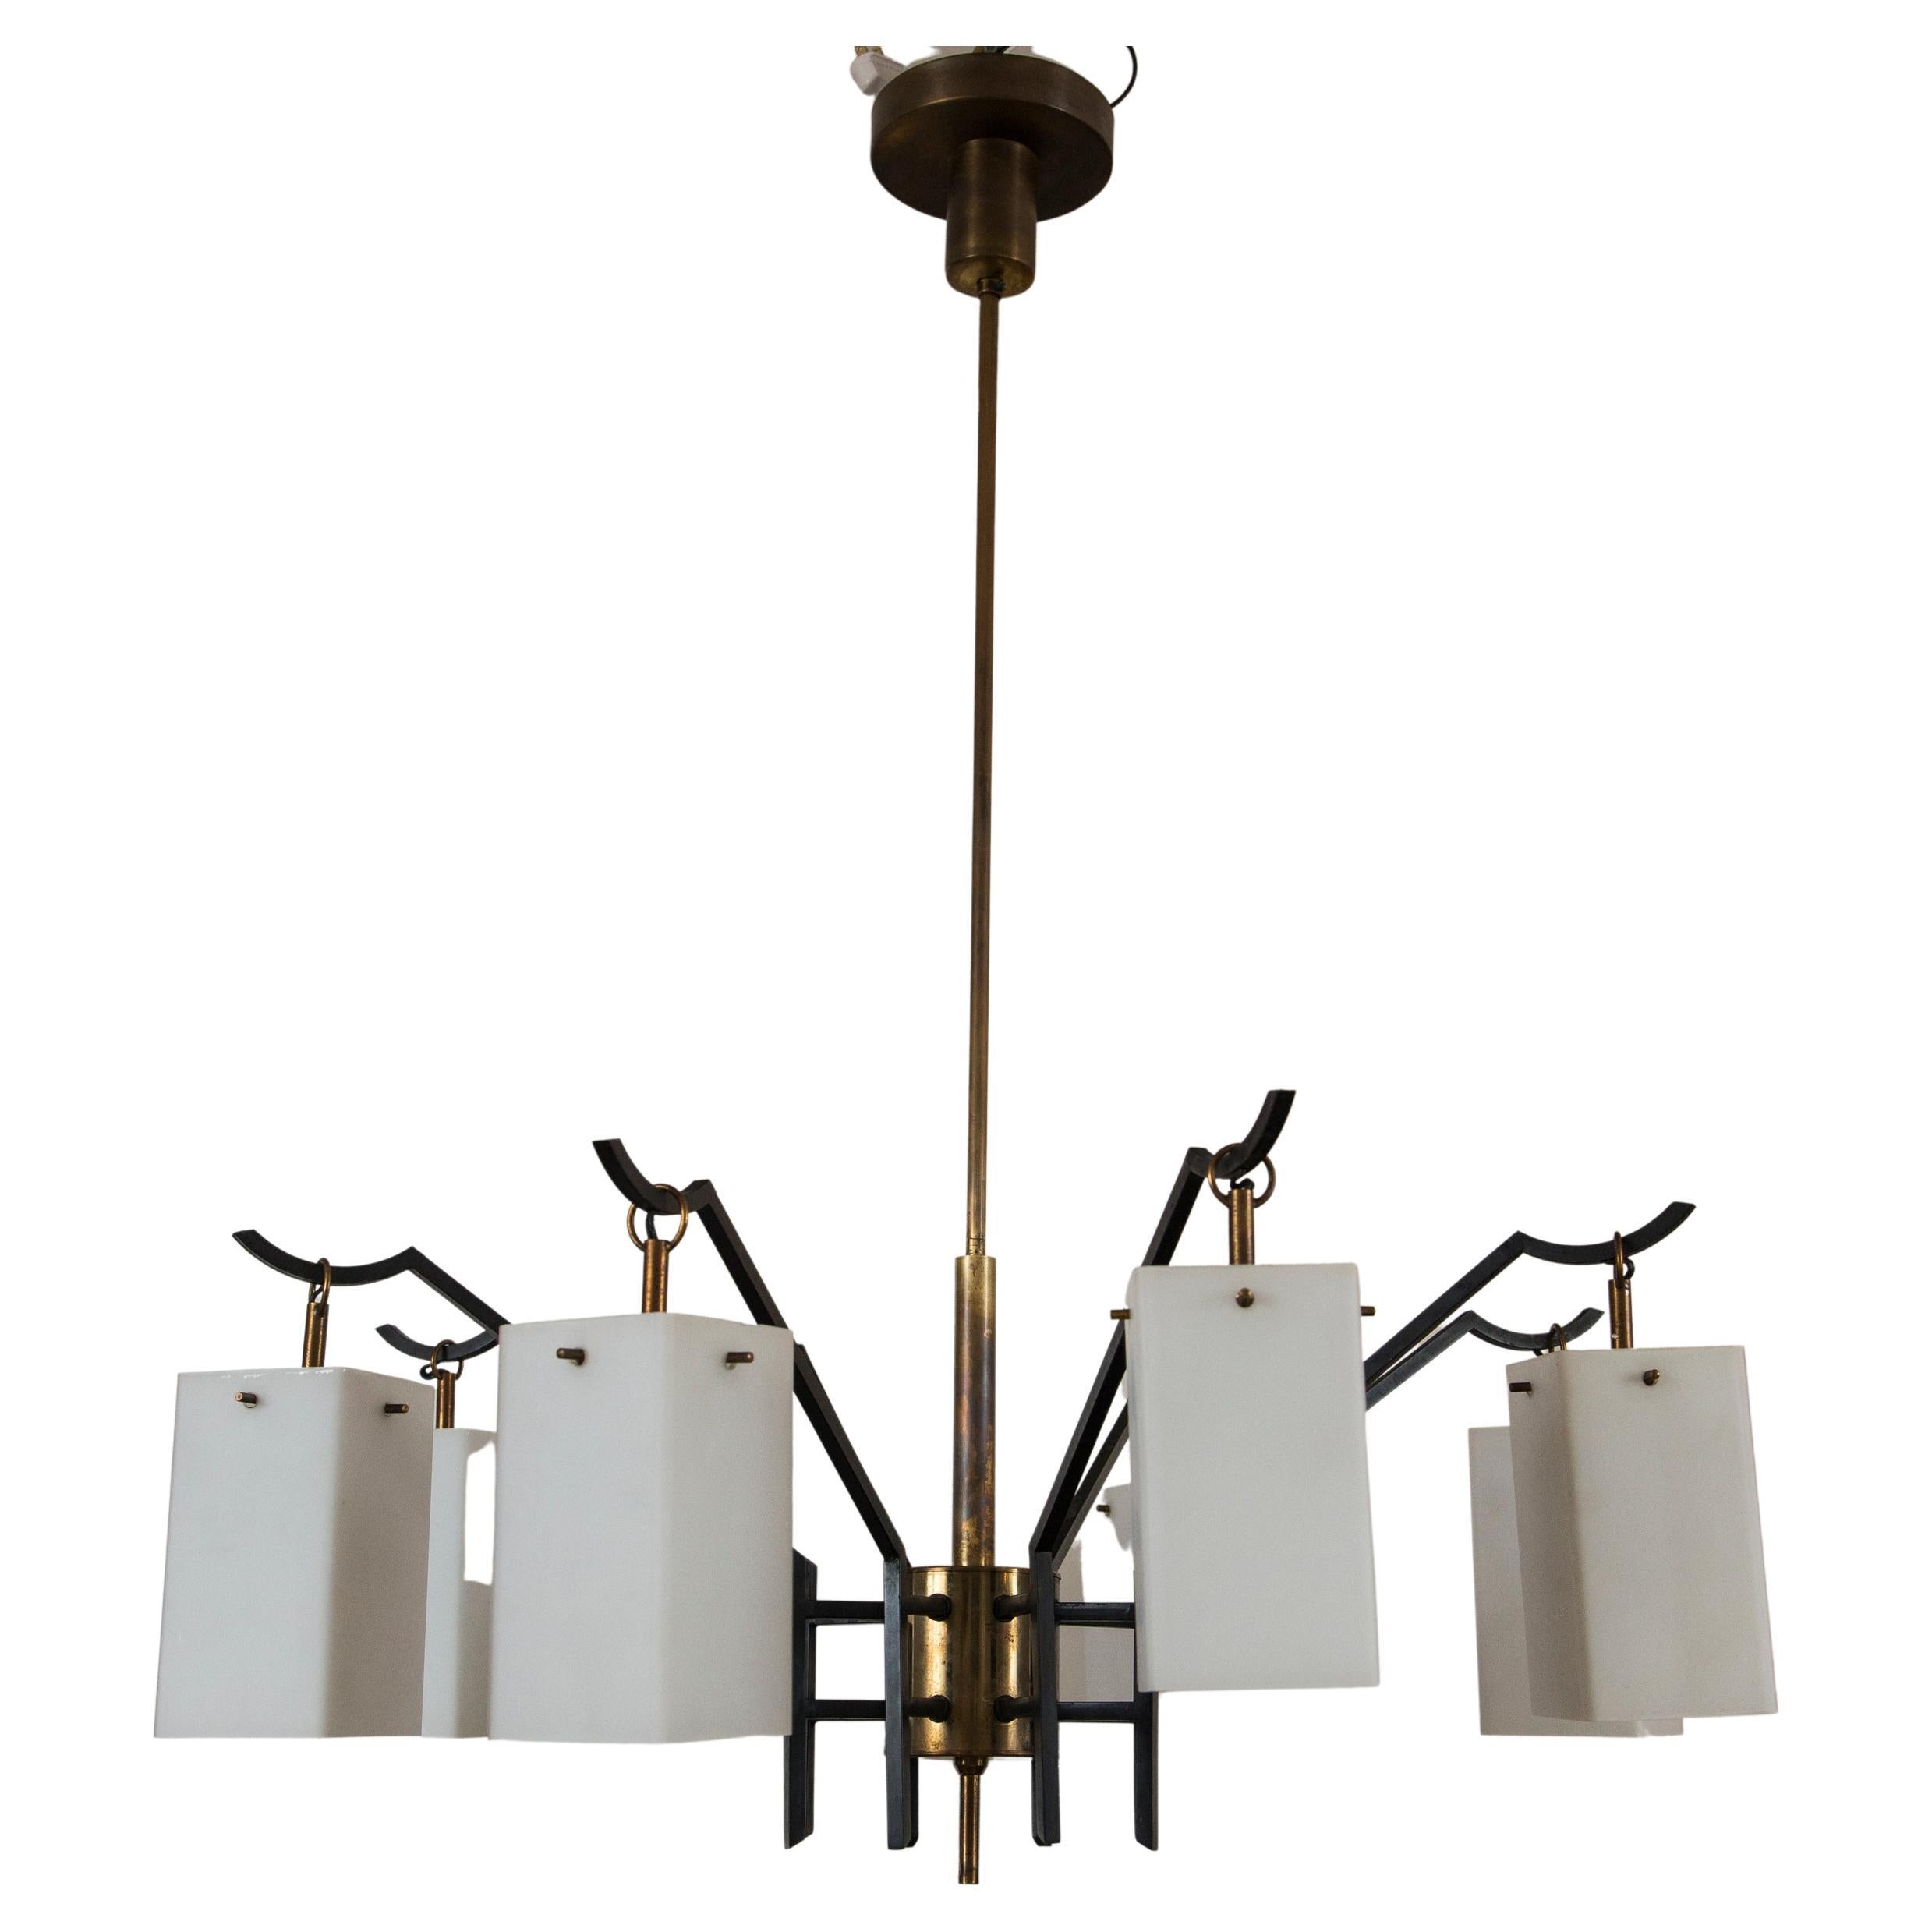 Elegant mid century Italian solid brass chandelier with six angular outstretching arms holding rectangular shaped satin opaque white glass shades attributed to Stilnovo, illumination is beautiful, re-electrified to code with new brass candelabra